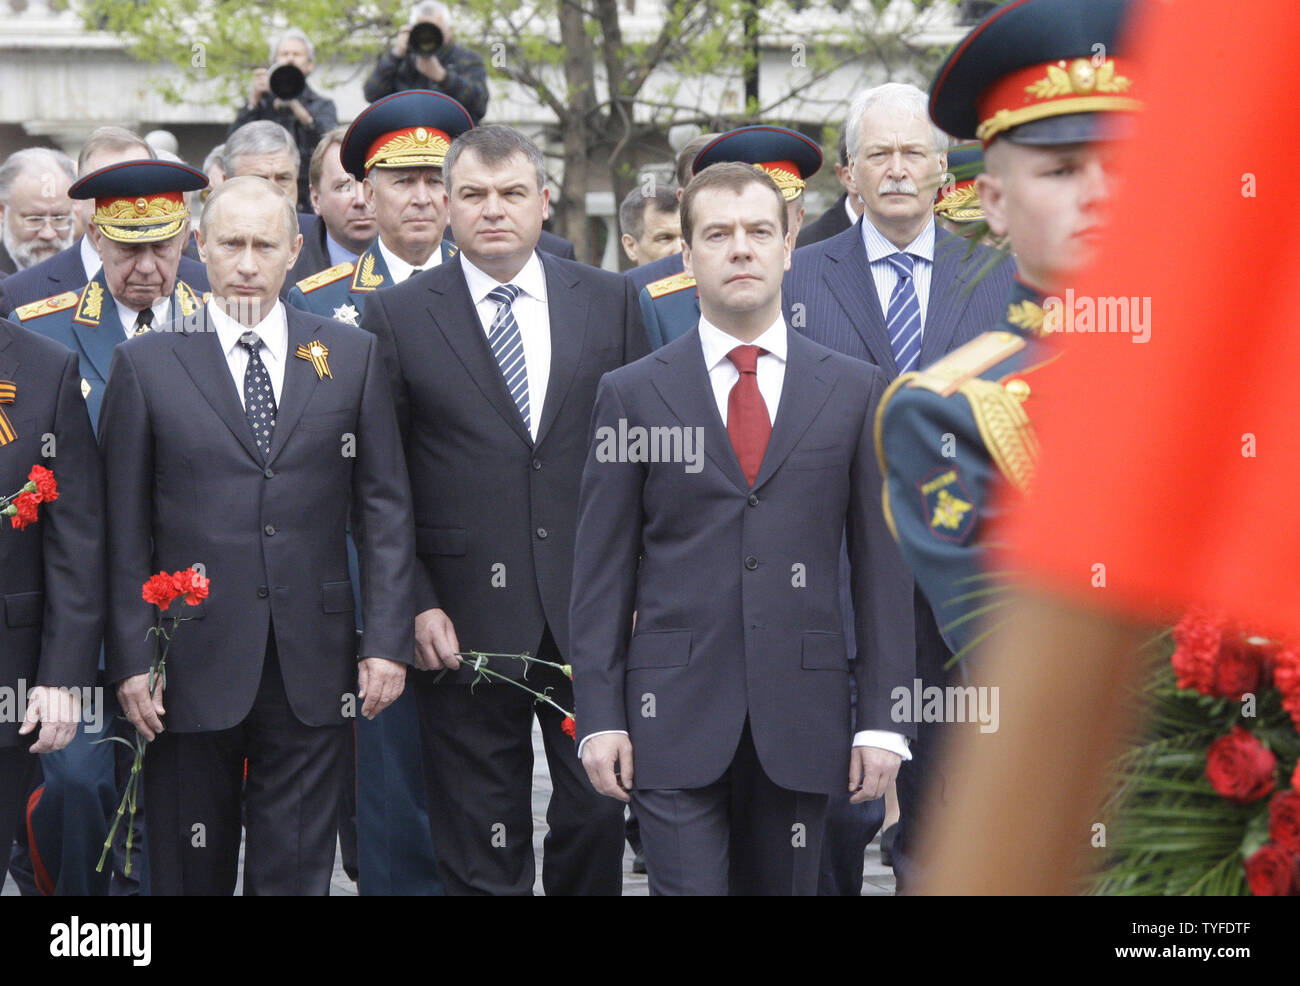 (L-R) Russian Prime Minister Vladimir Putin, Defence Minister Anatoly Serdyukov and President Dmitry Medvedev attend a wreath laying ceremony at the Tomb of the Unknown Soldier in Moscow on May 8, 2009 on the eve of the Victory Day. On May 9 Russia will celebrate the 64th anniversary of the World War II victory over Nazi Germany. (UPI Photo/Anatoli Zhdanov) Stock Photo